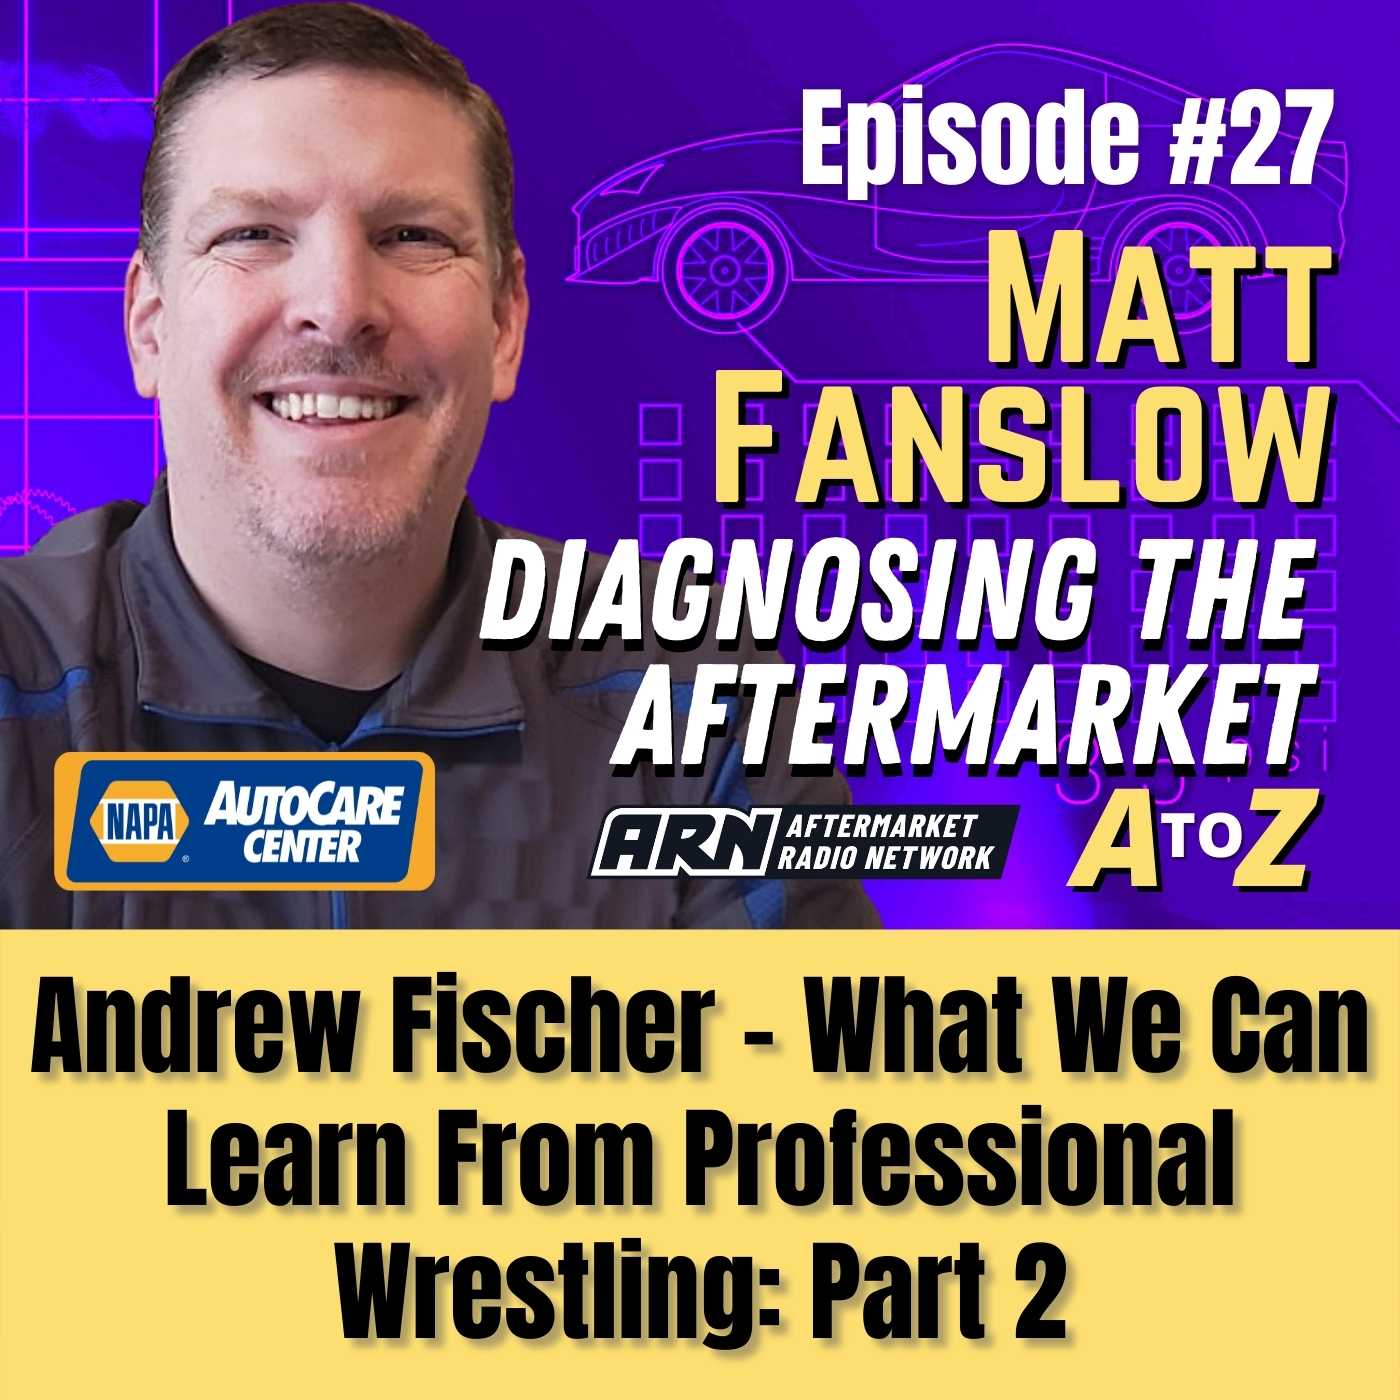 Artwork for podcast Matt Fanslow - Diagnosing the Aftermarket A to Z